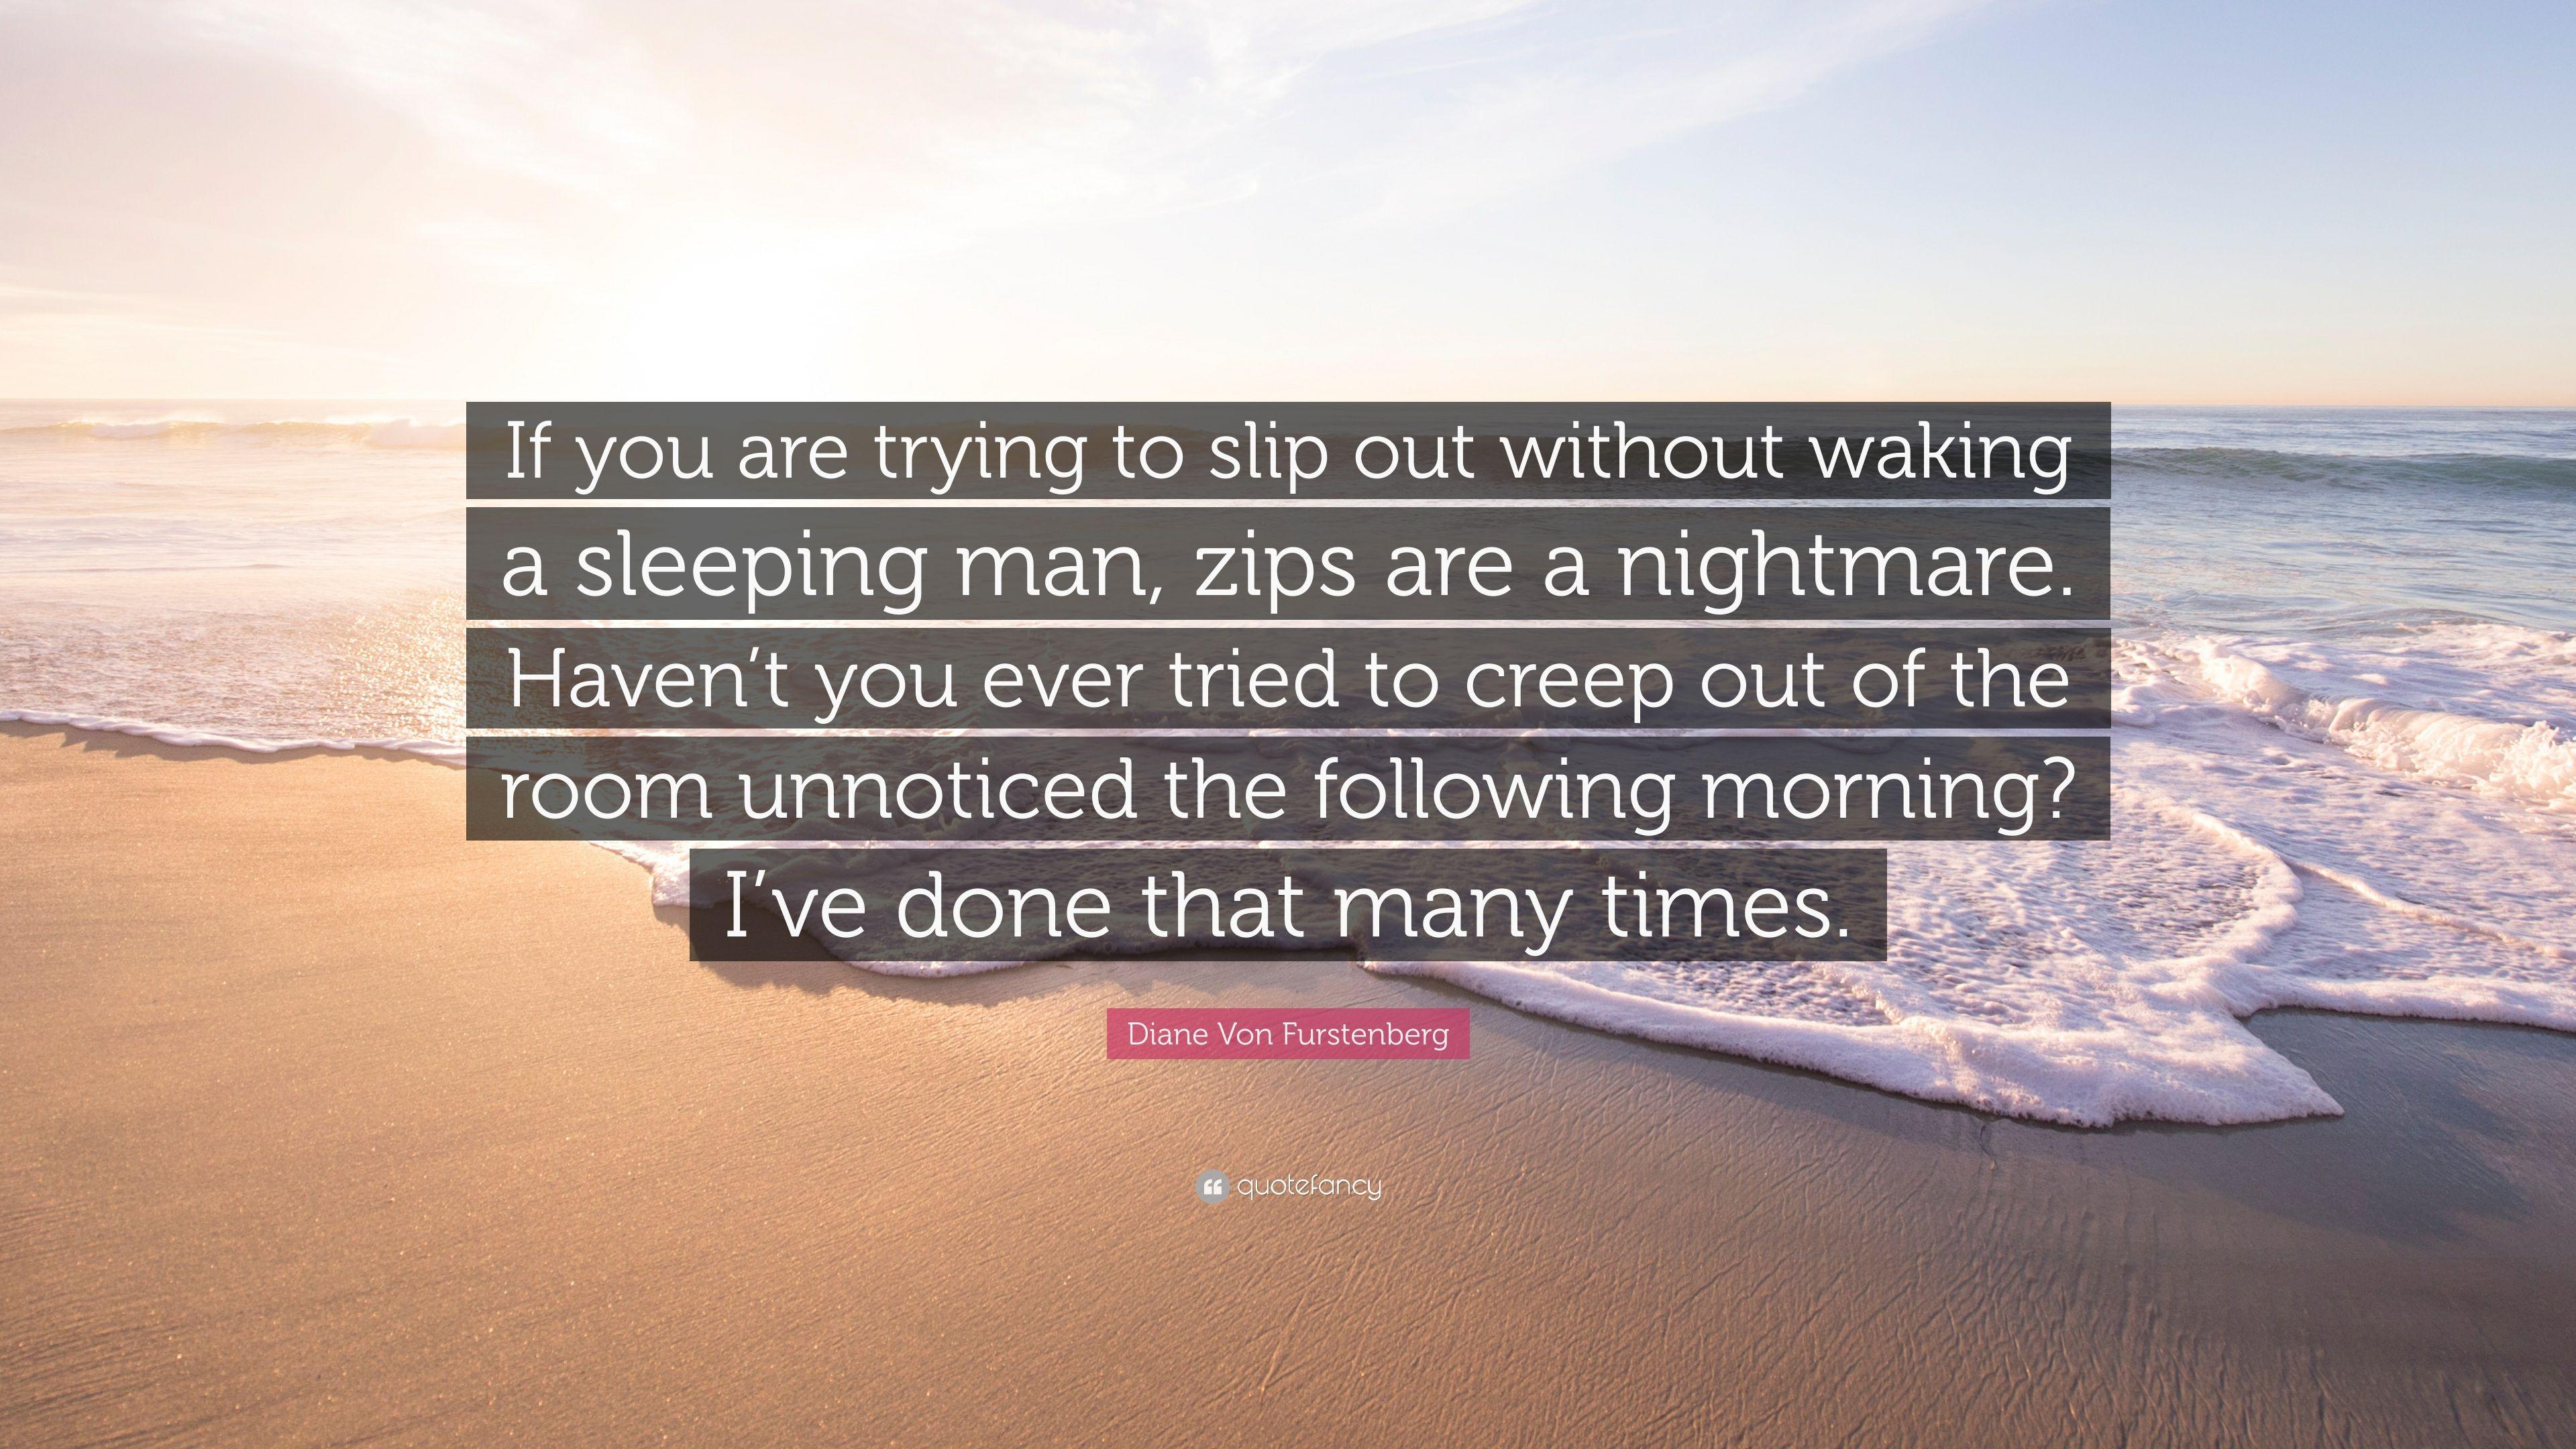 Diane Von Furstenberg Quote: “If you are trying to slip out without